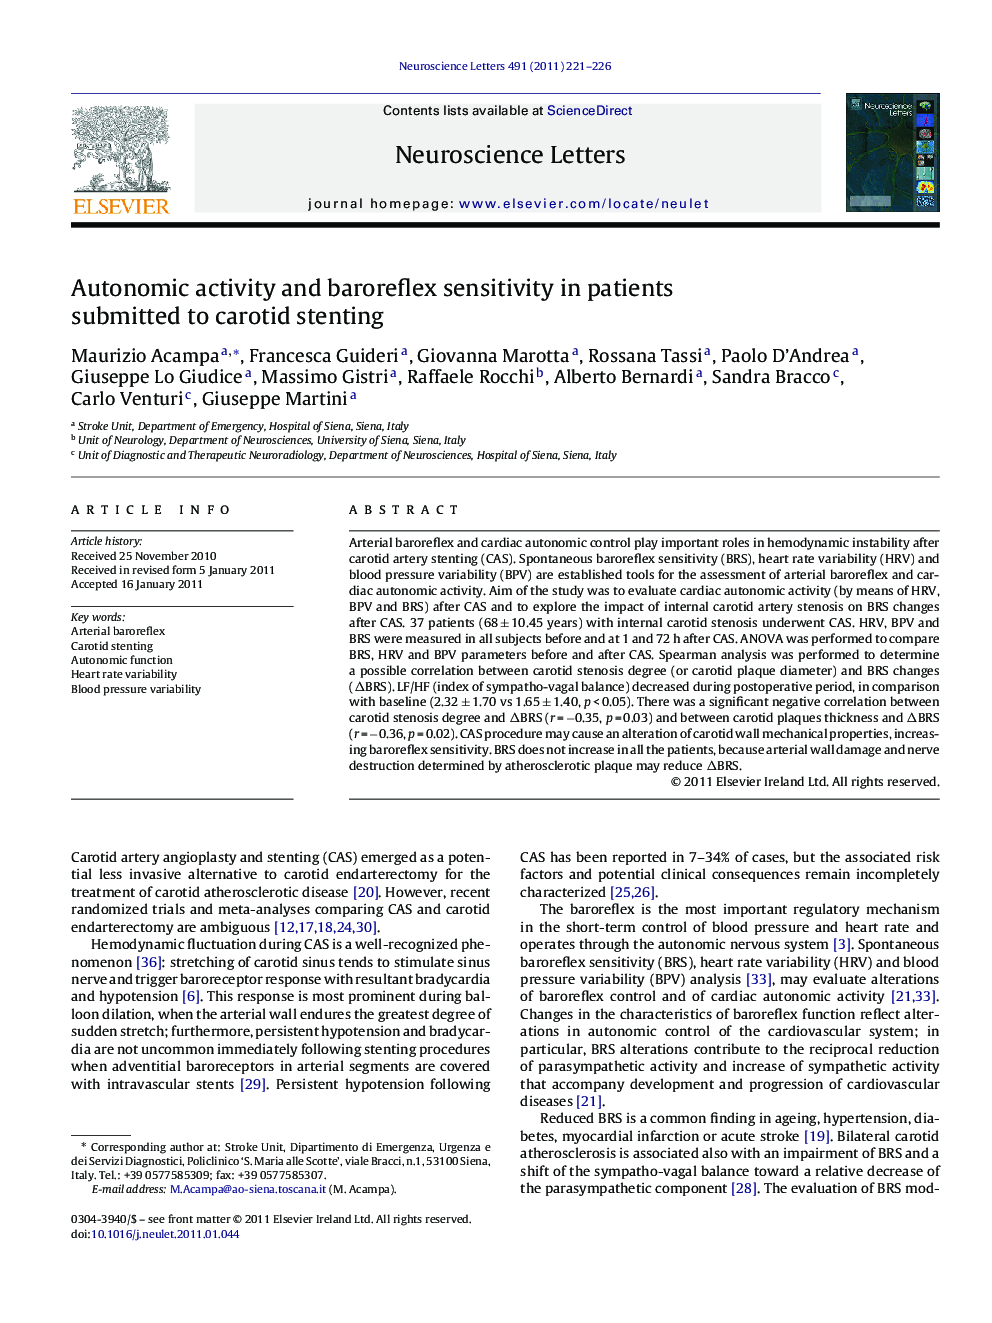 Autonomic activity and baroreflex sensitivity in patients submitted to carotid stenting